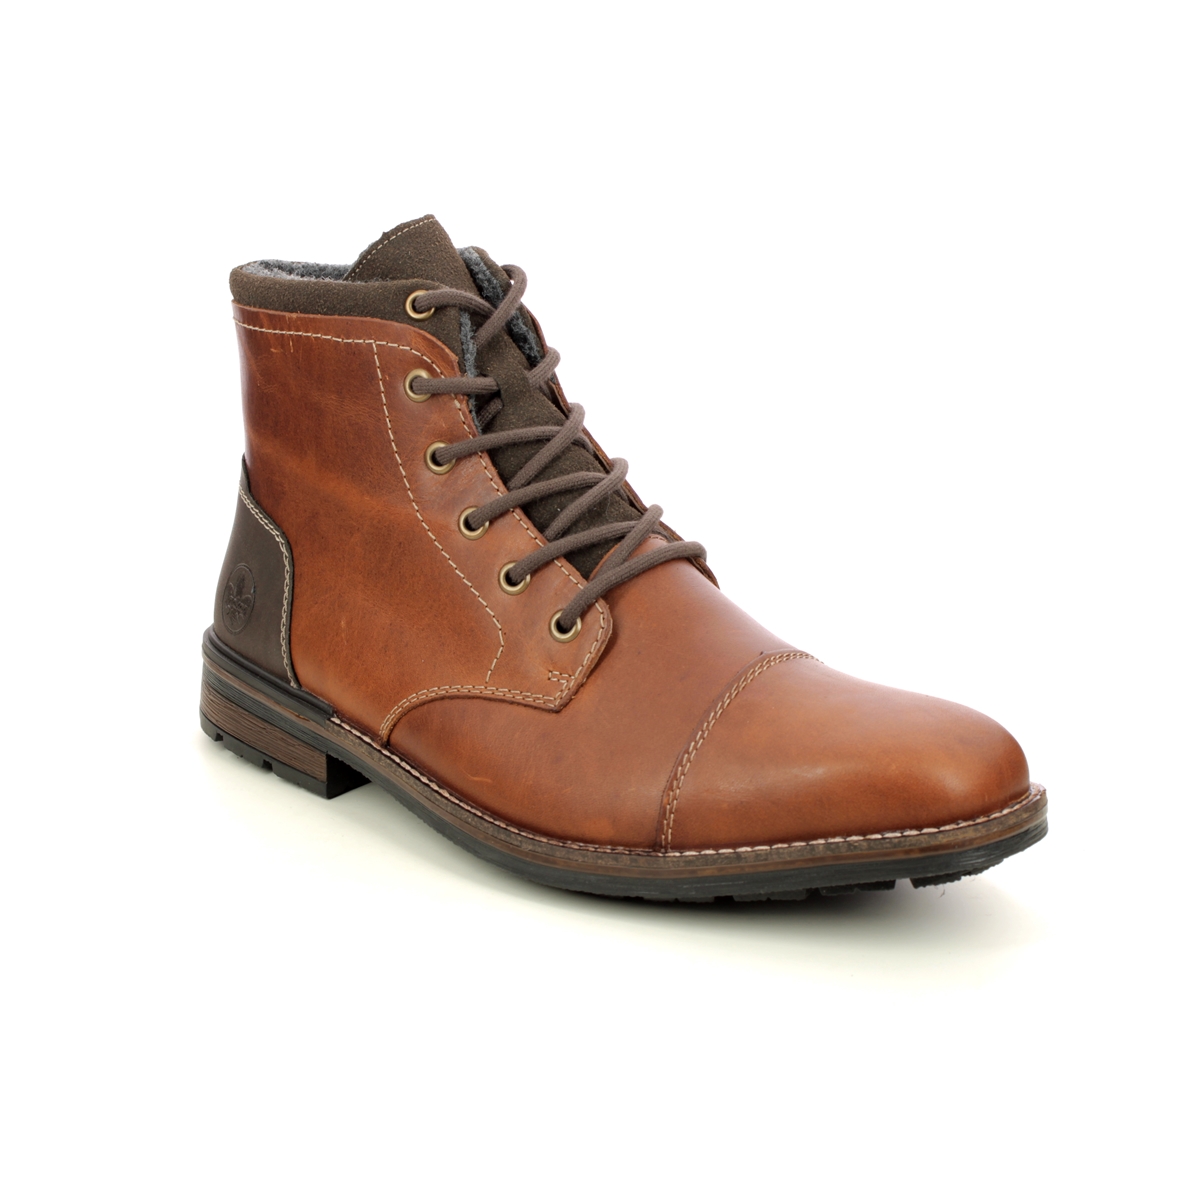 Rieker F1322-24 Brown leather Mens boots in a Plain Leather in Size 46